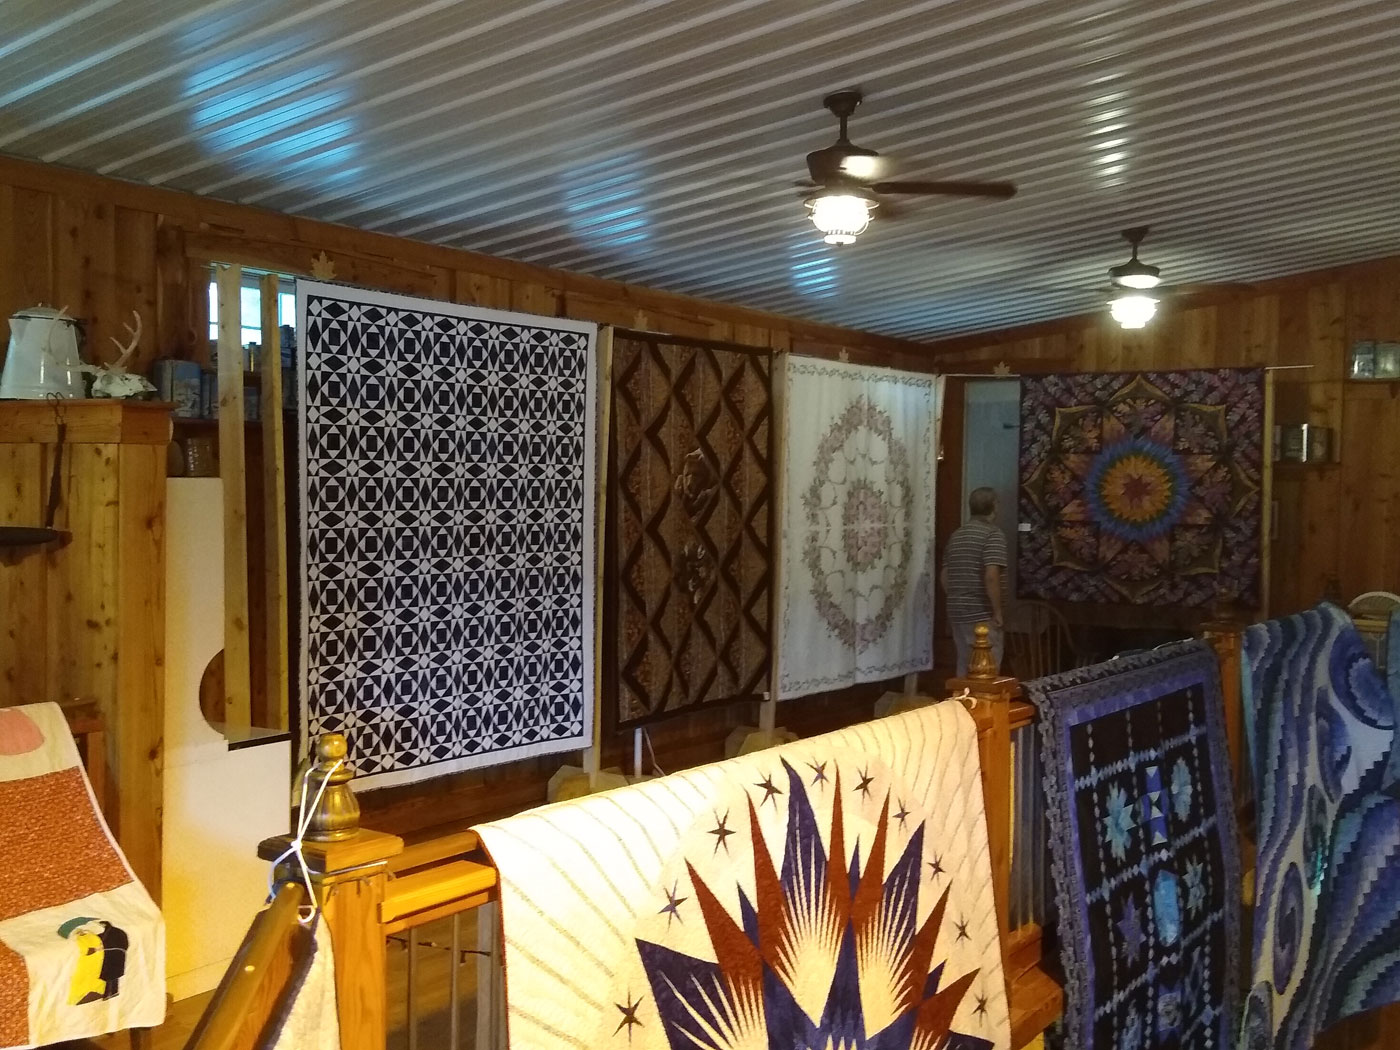 2019 Quilt Show at Wendel's Maple